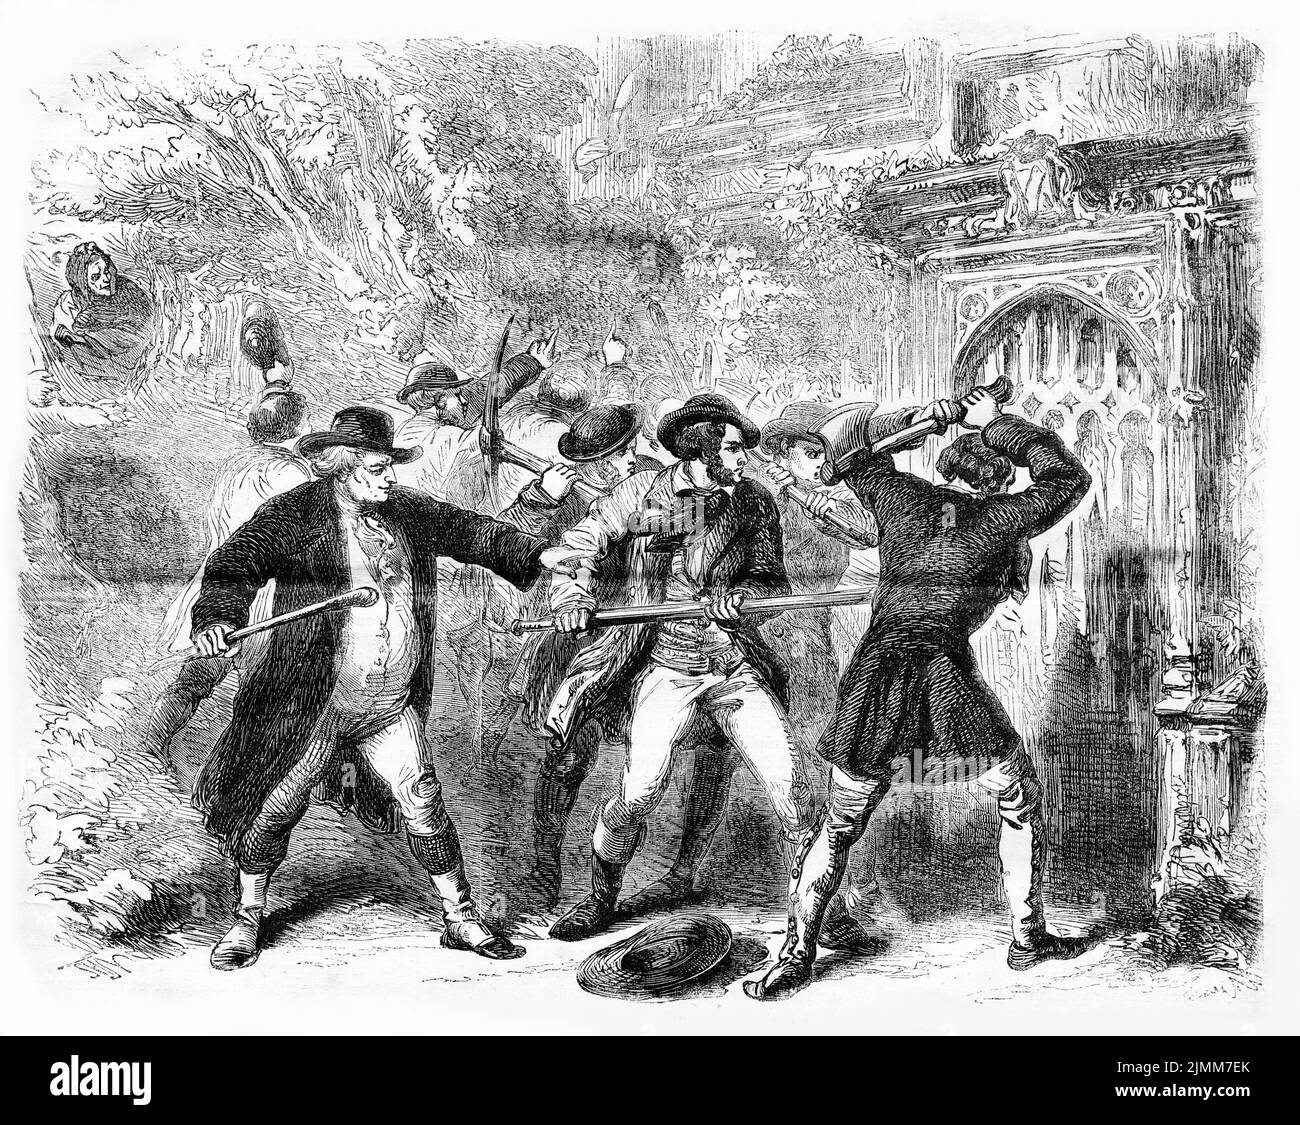 Illustration from the French magazine Journal Pour Tous (newspaper for all) in 1856, showing a crowd of men breaking into a mansion Stock Photo